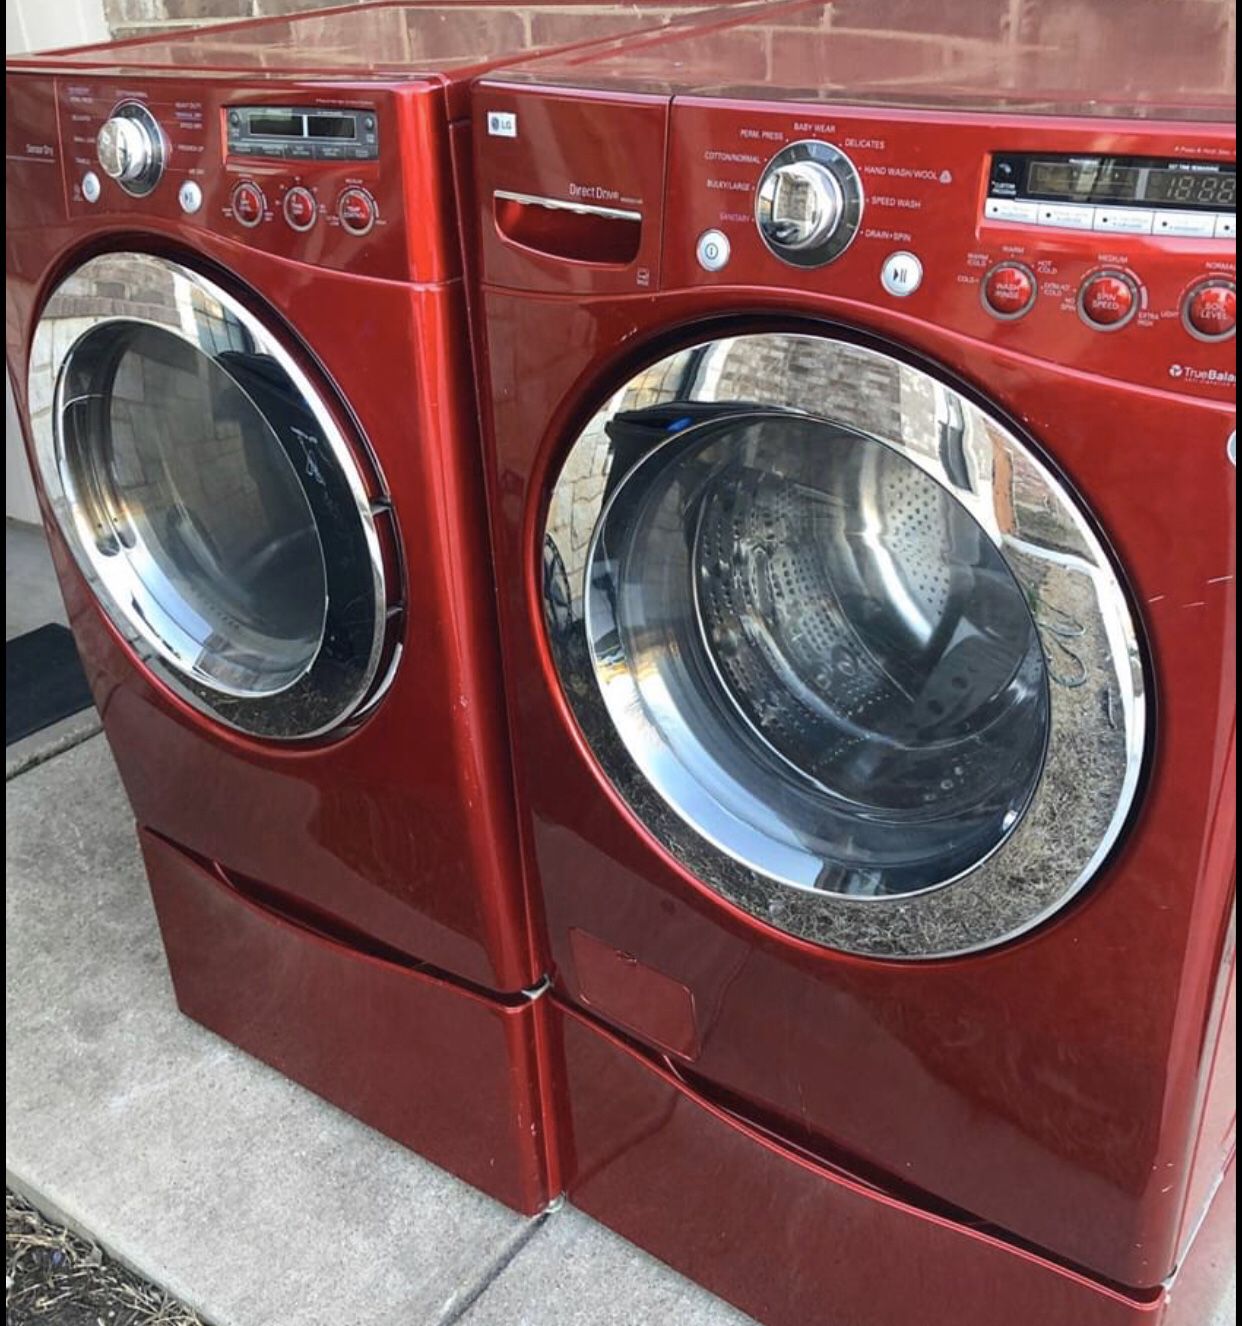 LG washer and dryer set